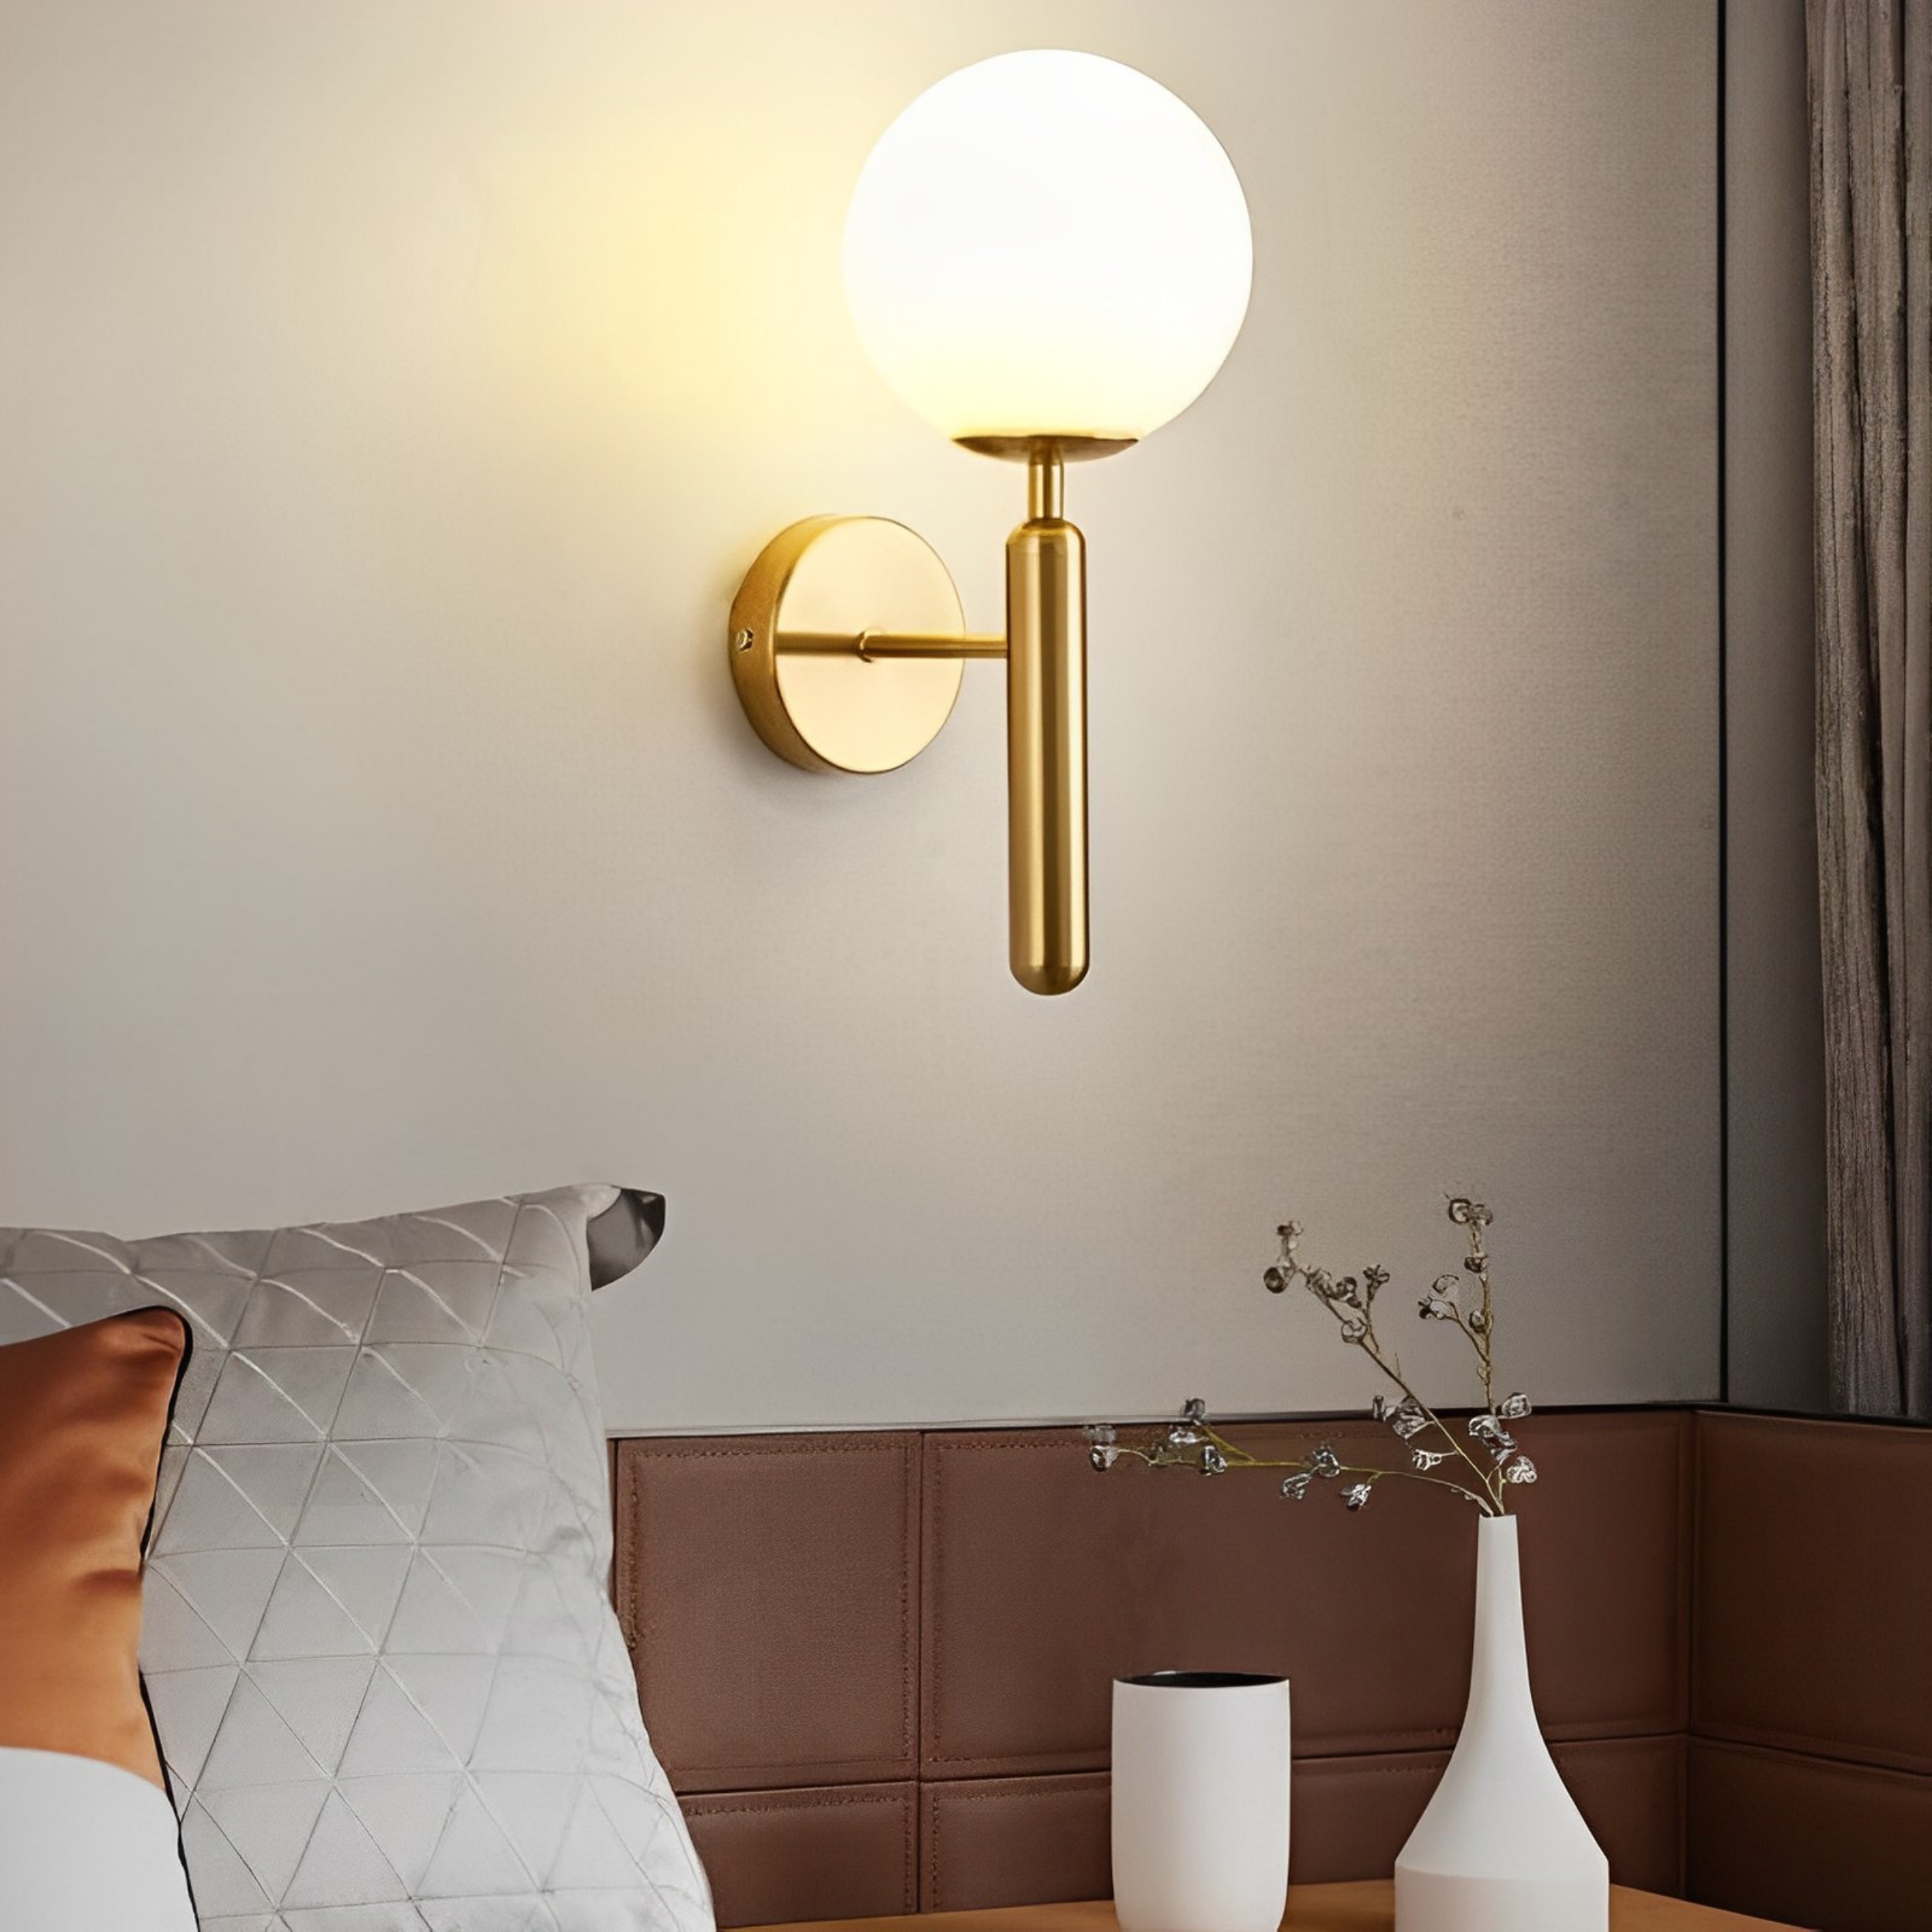 WL-B0032 Modern White glass ball wall lights Creative Metal Glass Wall Lamps for bedroom, stair, Corridor, Hallway bedside wall mounted lamp (Single Piece)